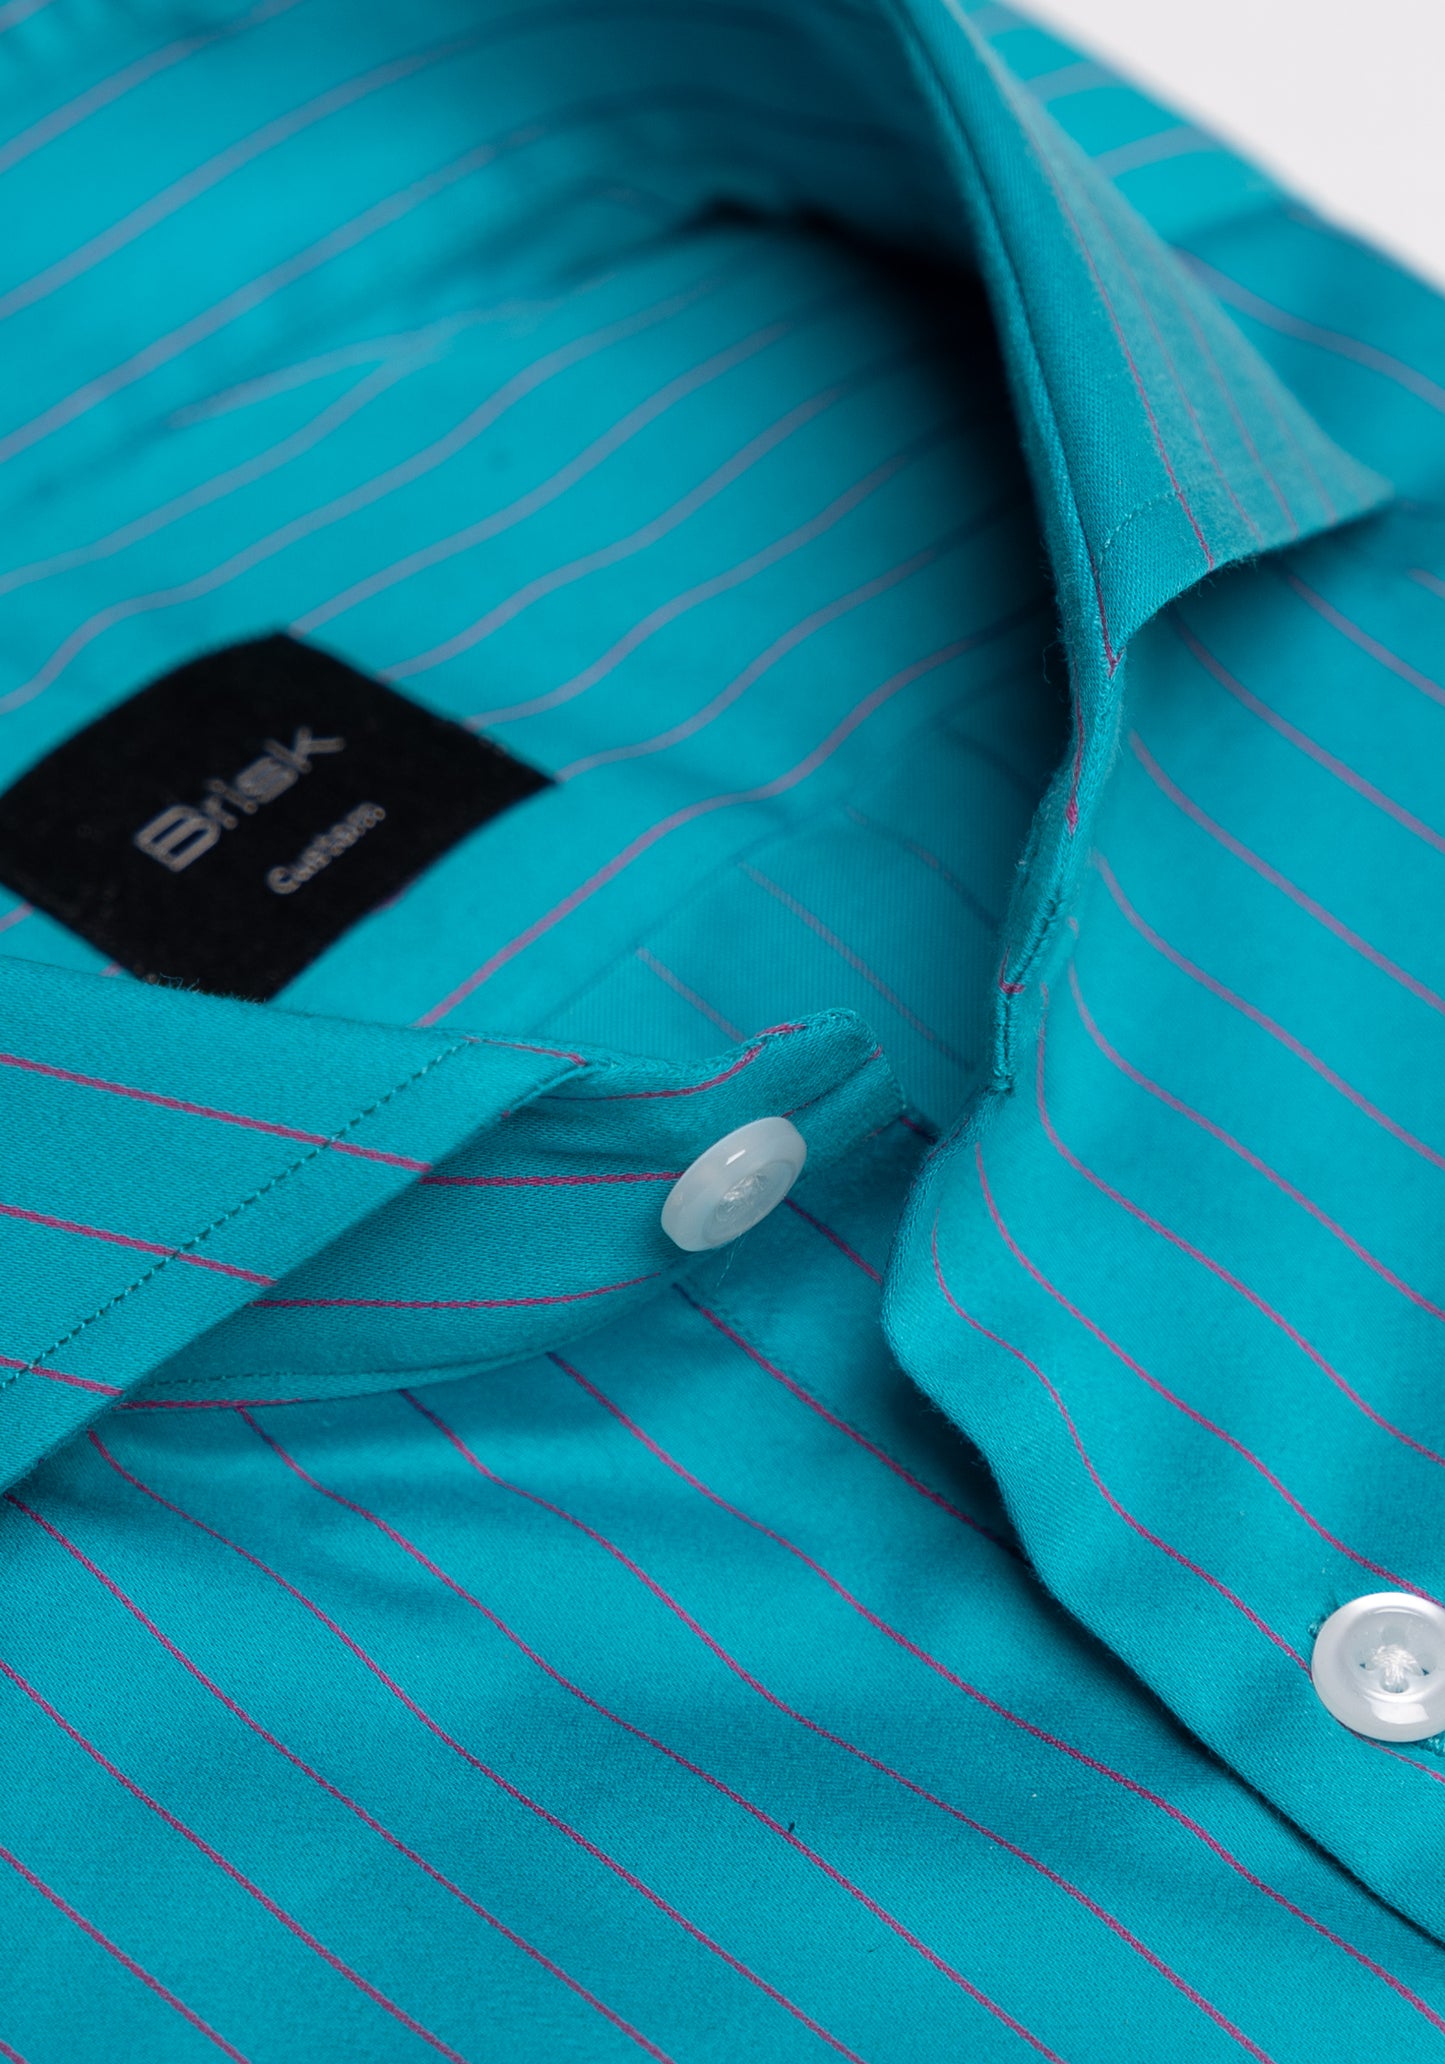 Egyptian Pink On Turquoise Pencil Stripes Shirt - SALE